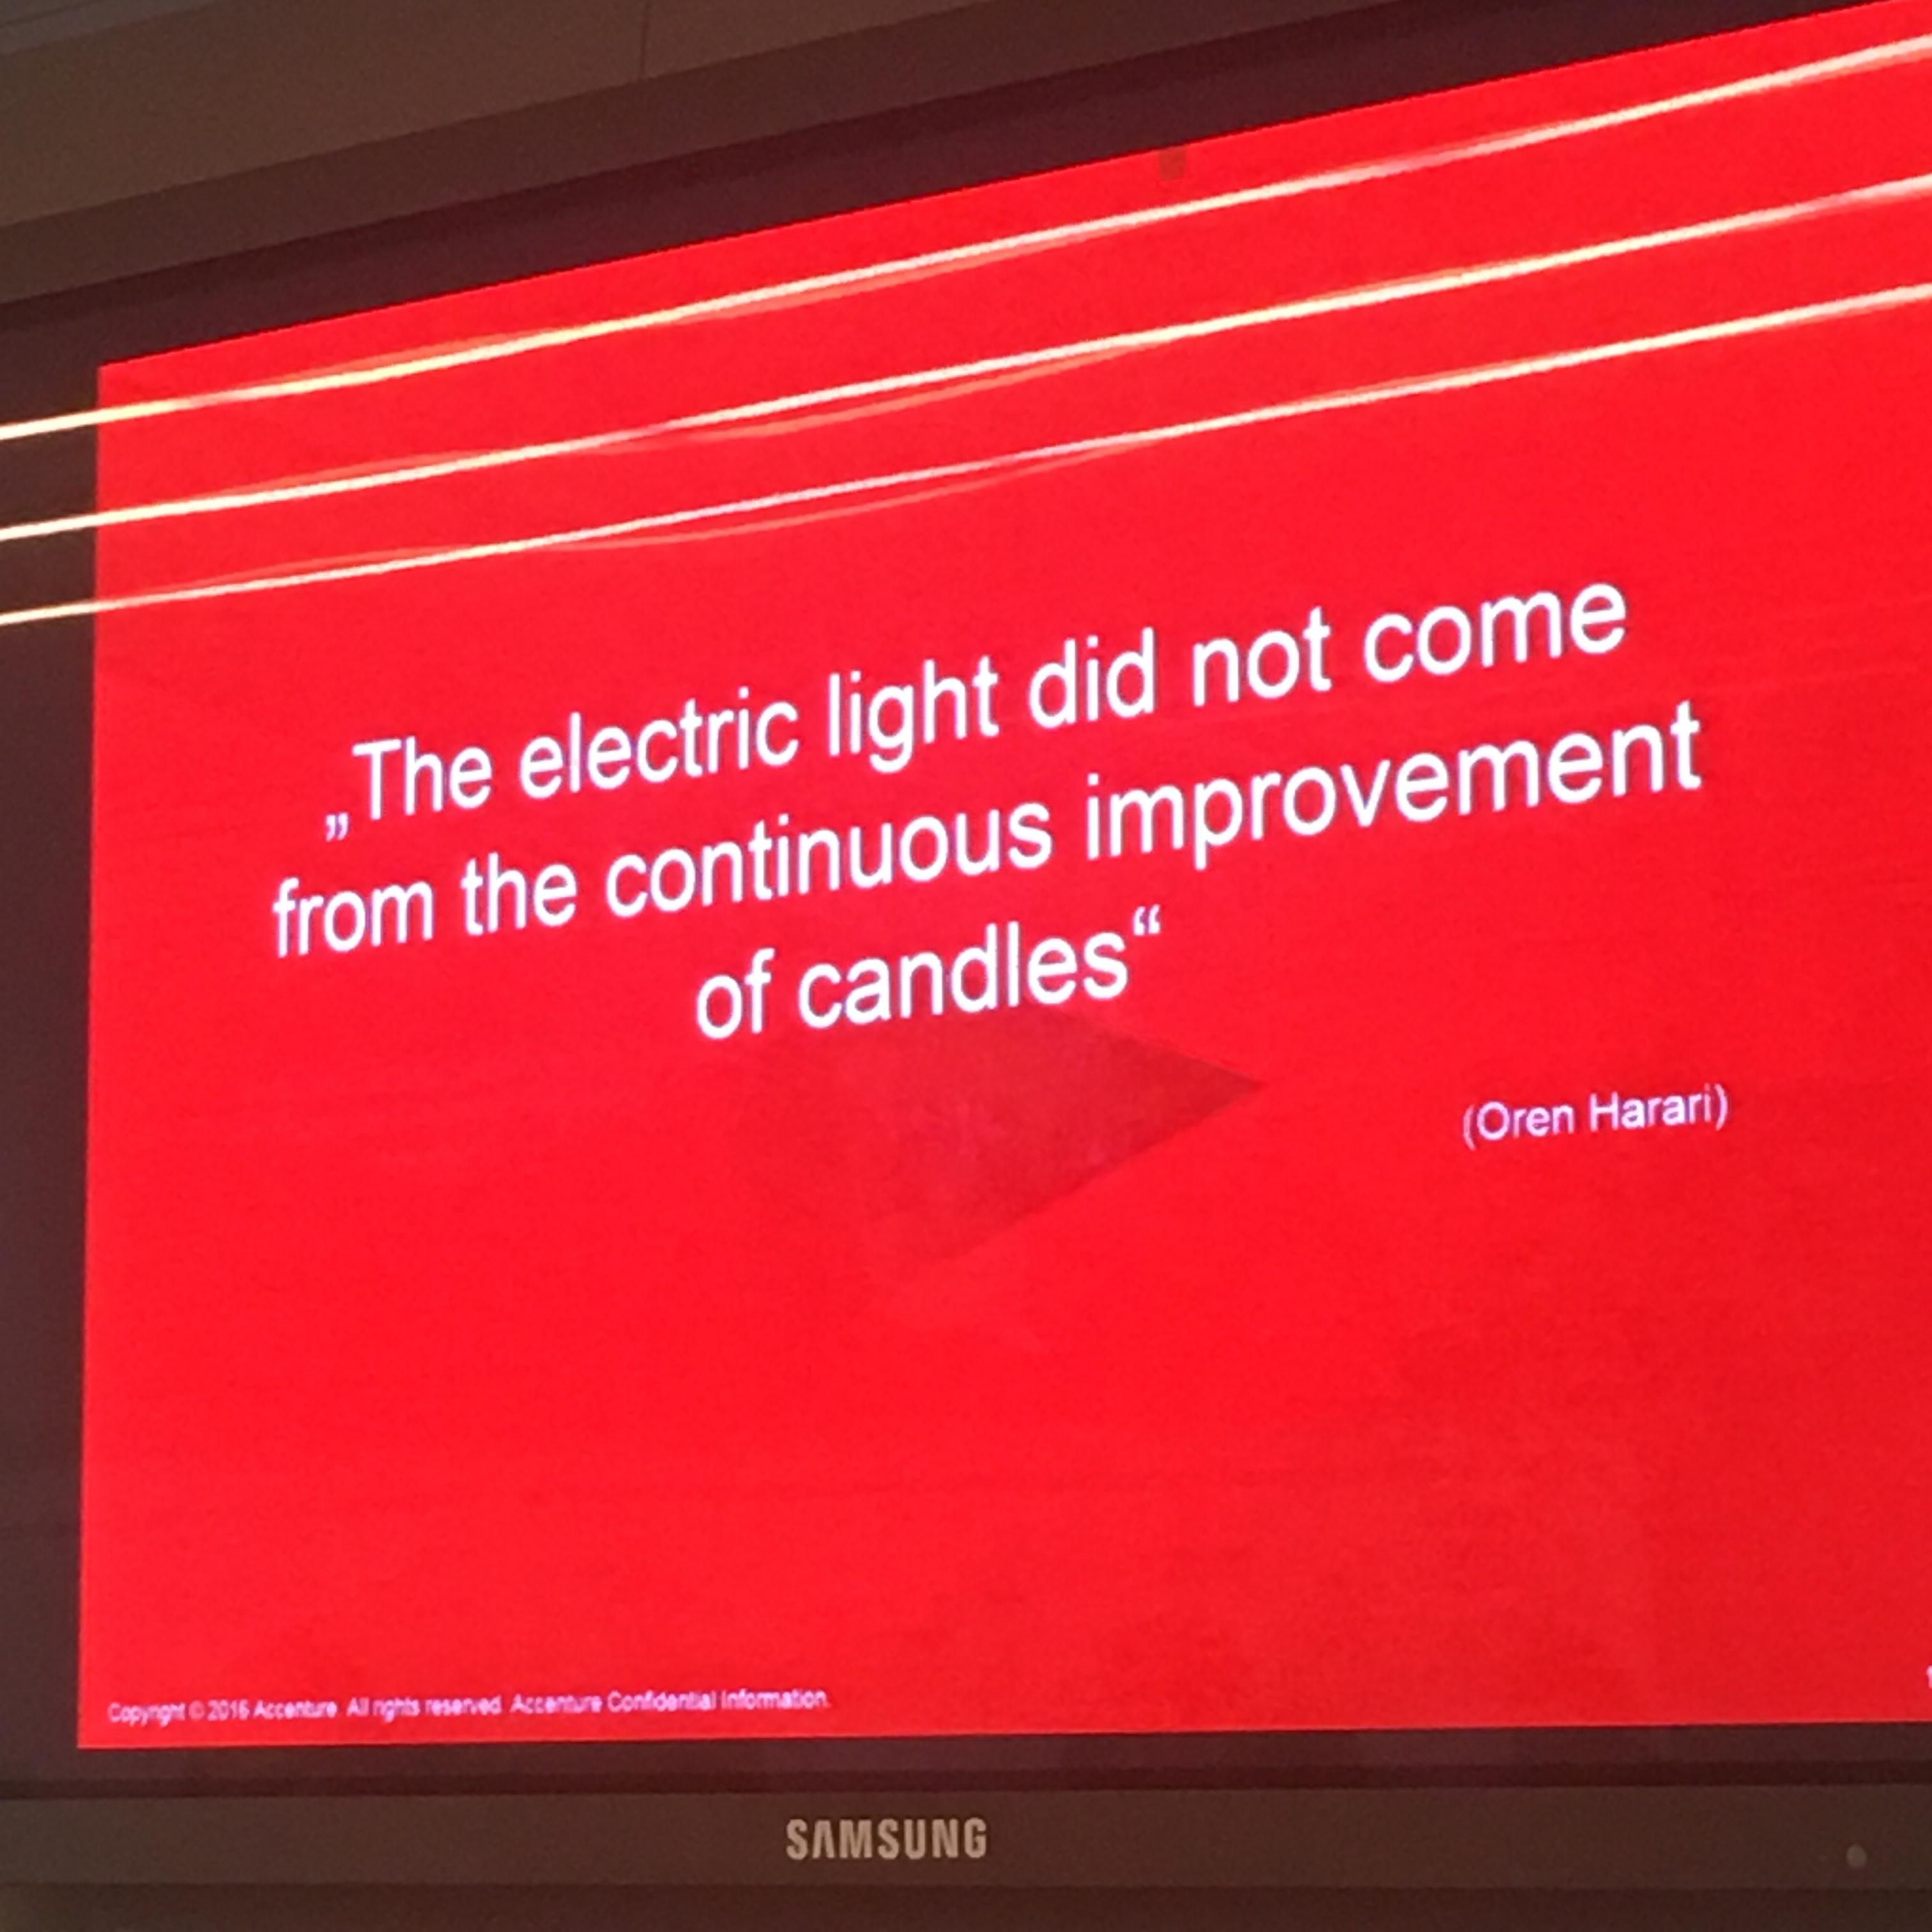 the_electric_light_is_not_candle_improvement.jpeg